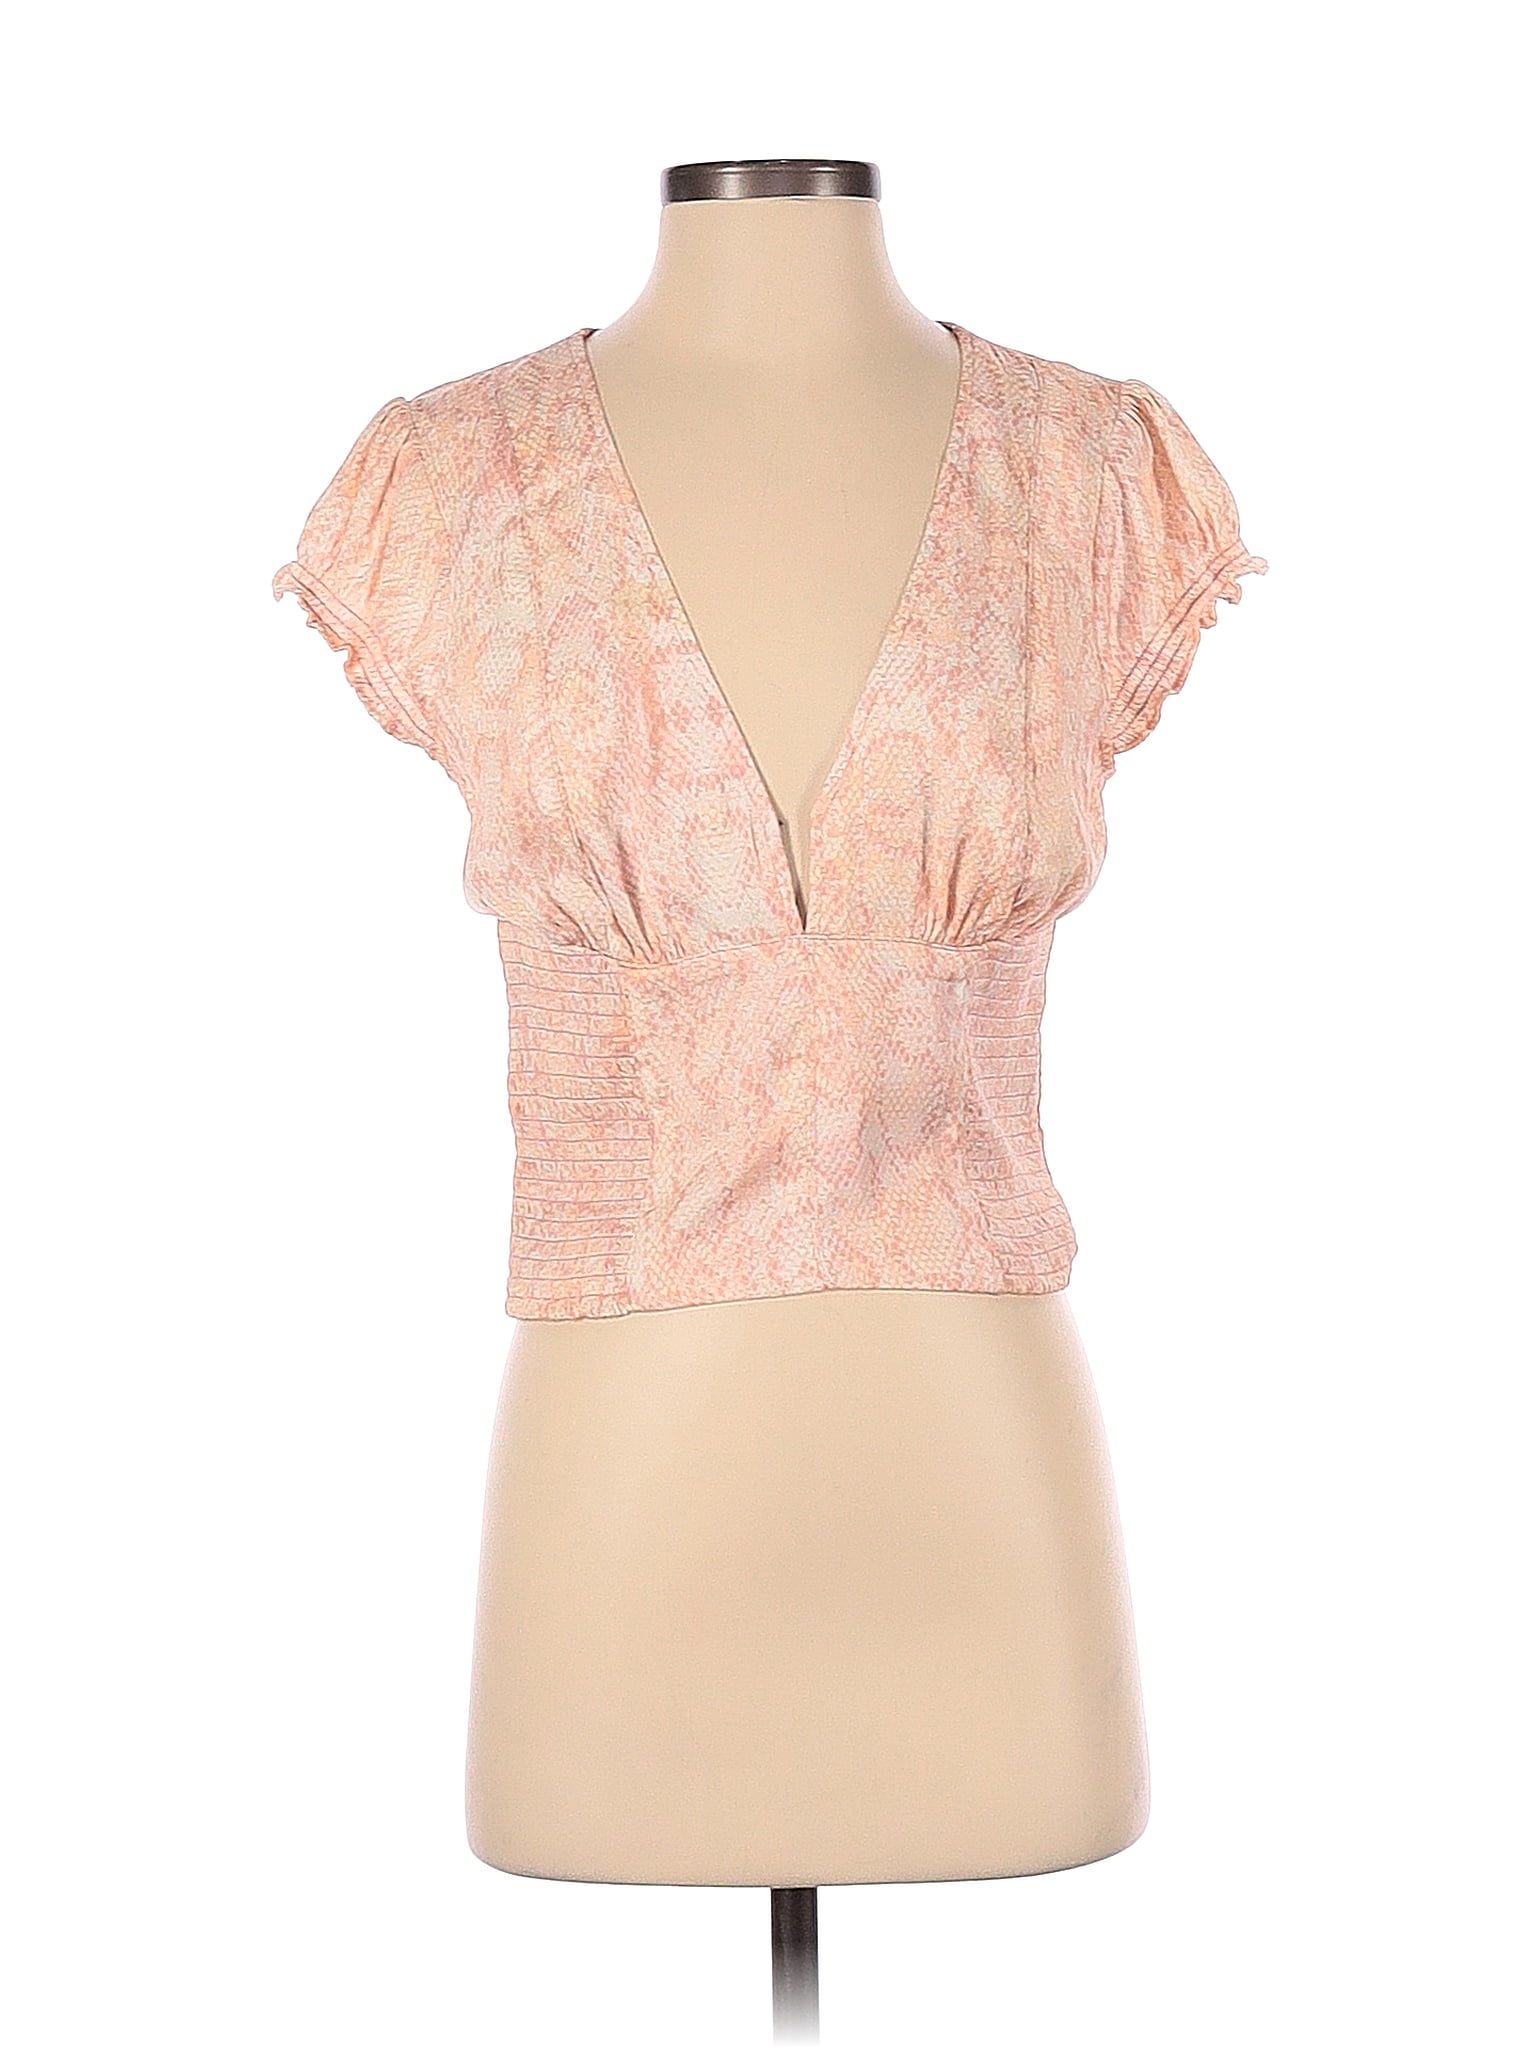 Free People 100% Polyester Pink Short Sleeve Blouse Size S - 68% off ...